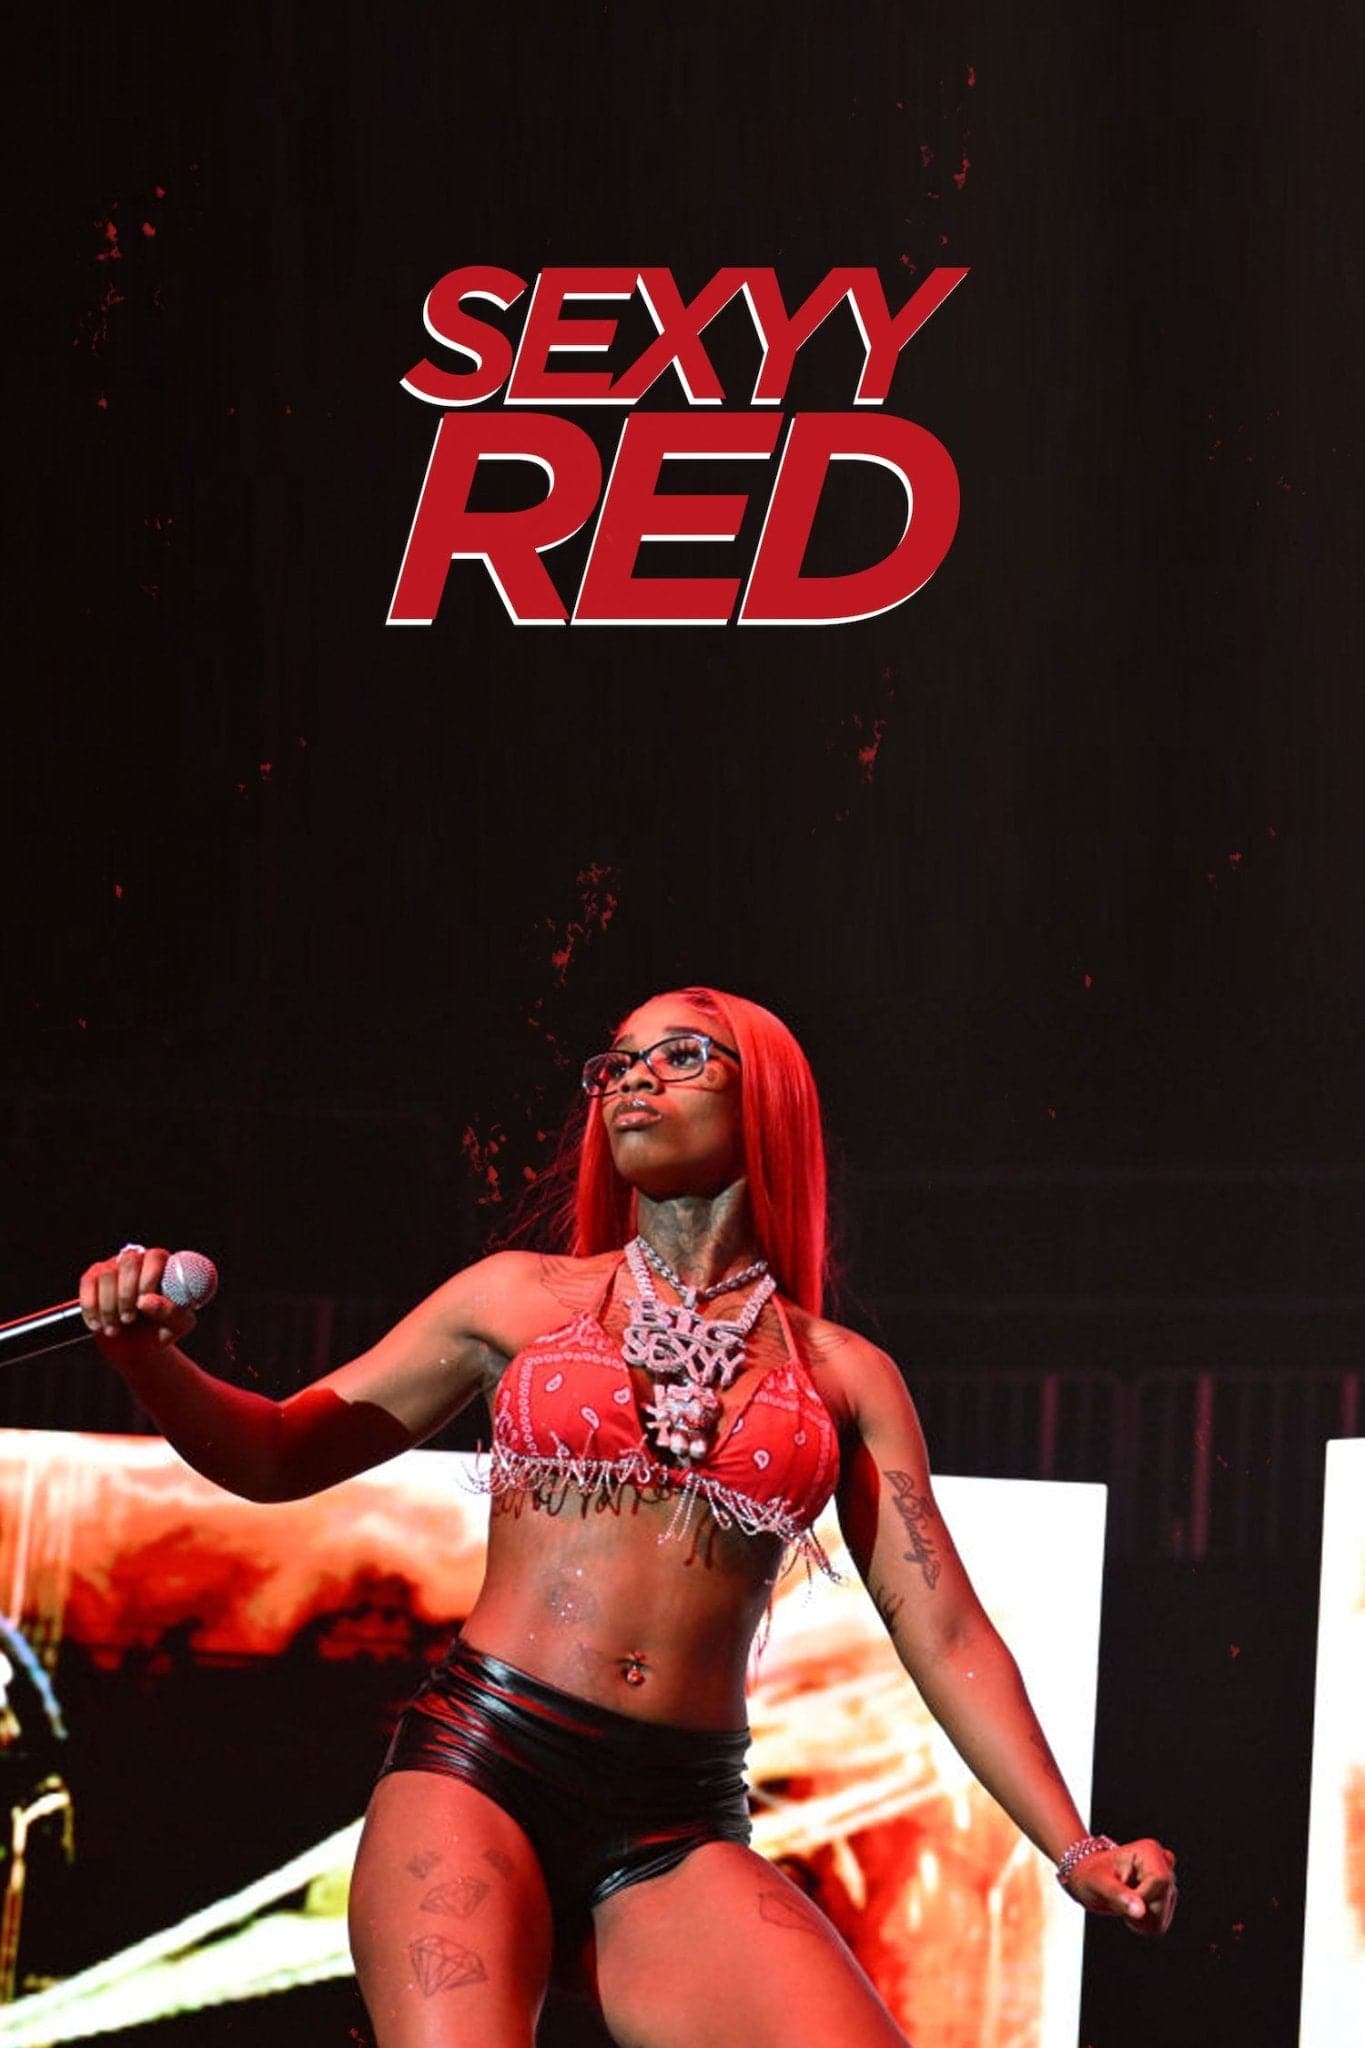 Sexyy Red 'Dance' Poster - Posters Plug